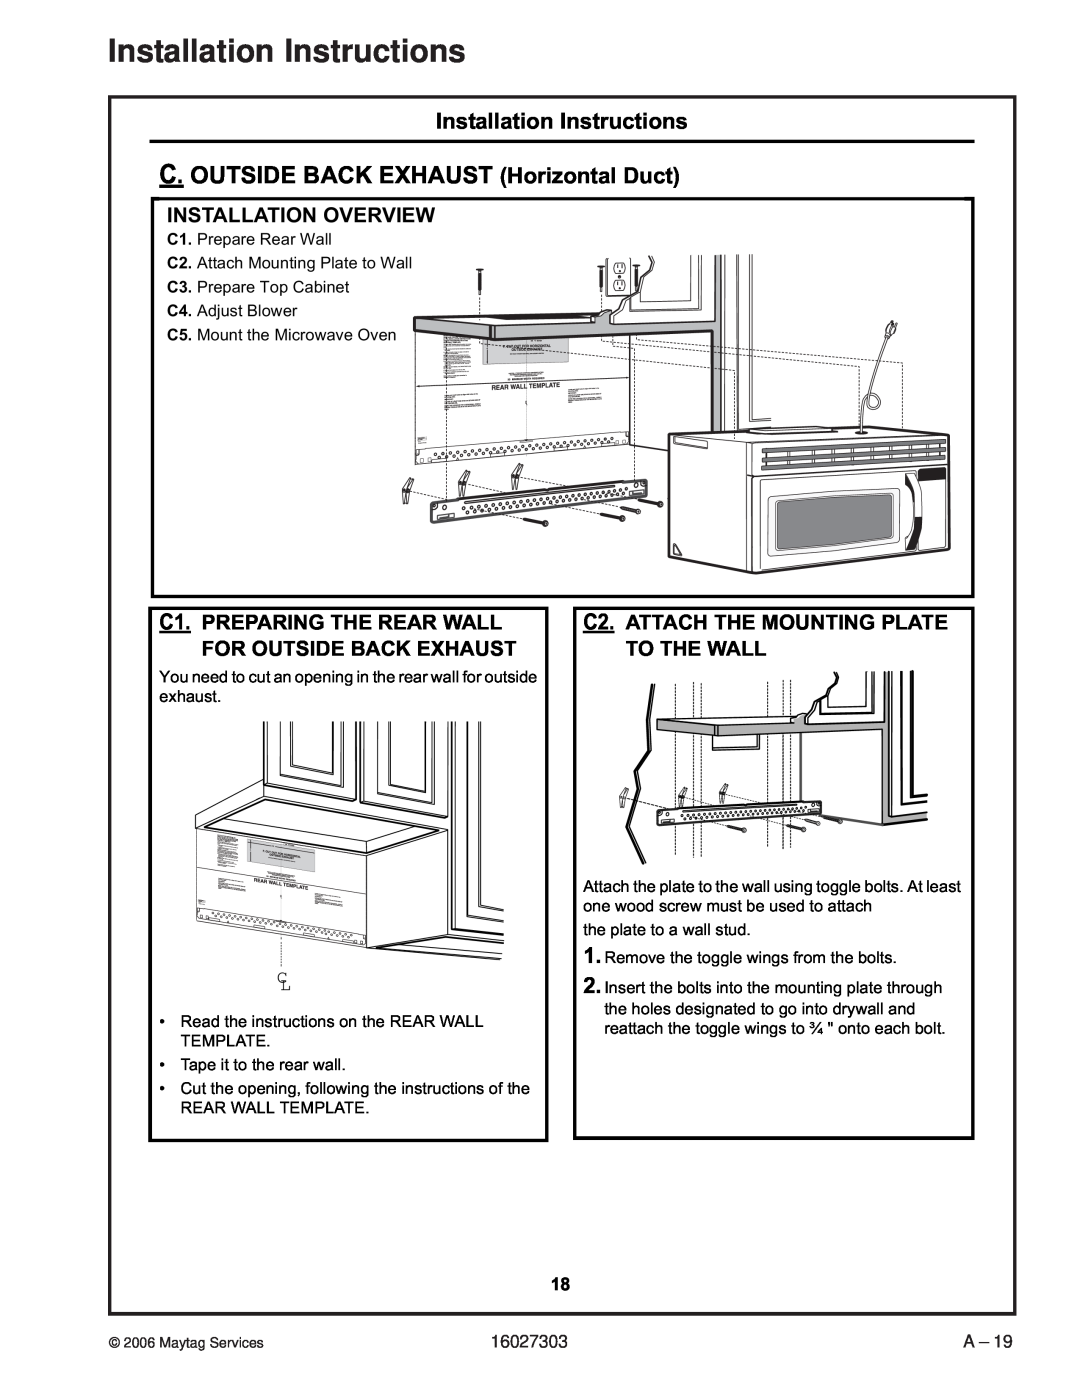 Maytag UMV1152CA C.OUTSIDE BACK EXHAUST Horizontal Duct, C2.ATTACH THE MOUNTING PLATE TO THE WALL, Installation Overview 